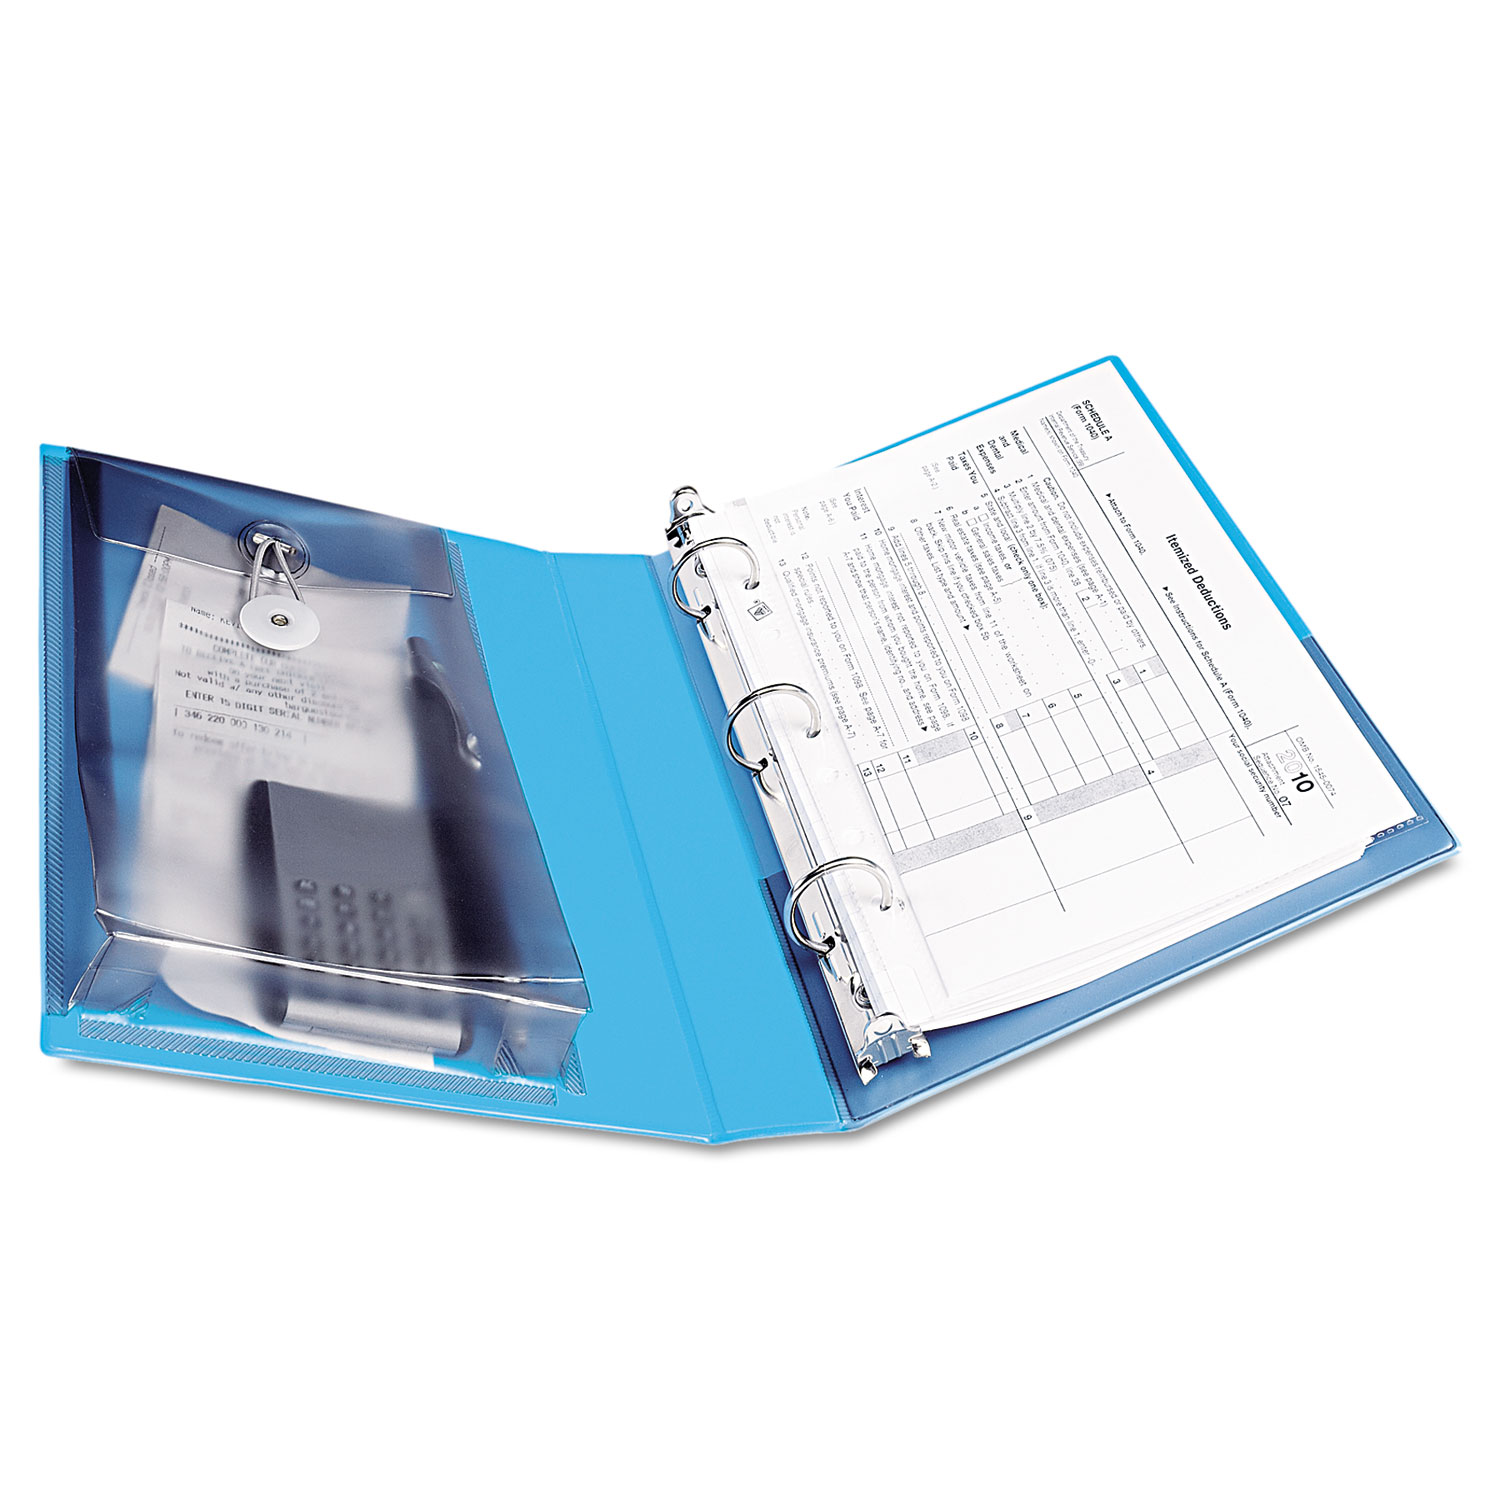  Avery 23014 Mini Size Protect and Store View Binder with Round Rings, 3 Rings, 1 Capacity, 8.5 x 5.5, Blue (AVE23014) 